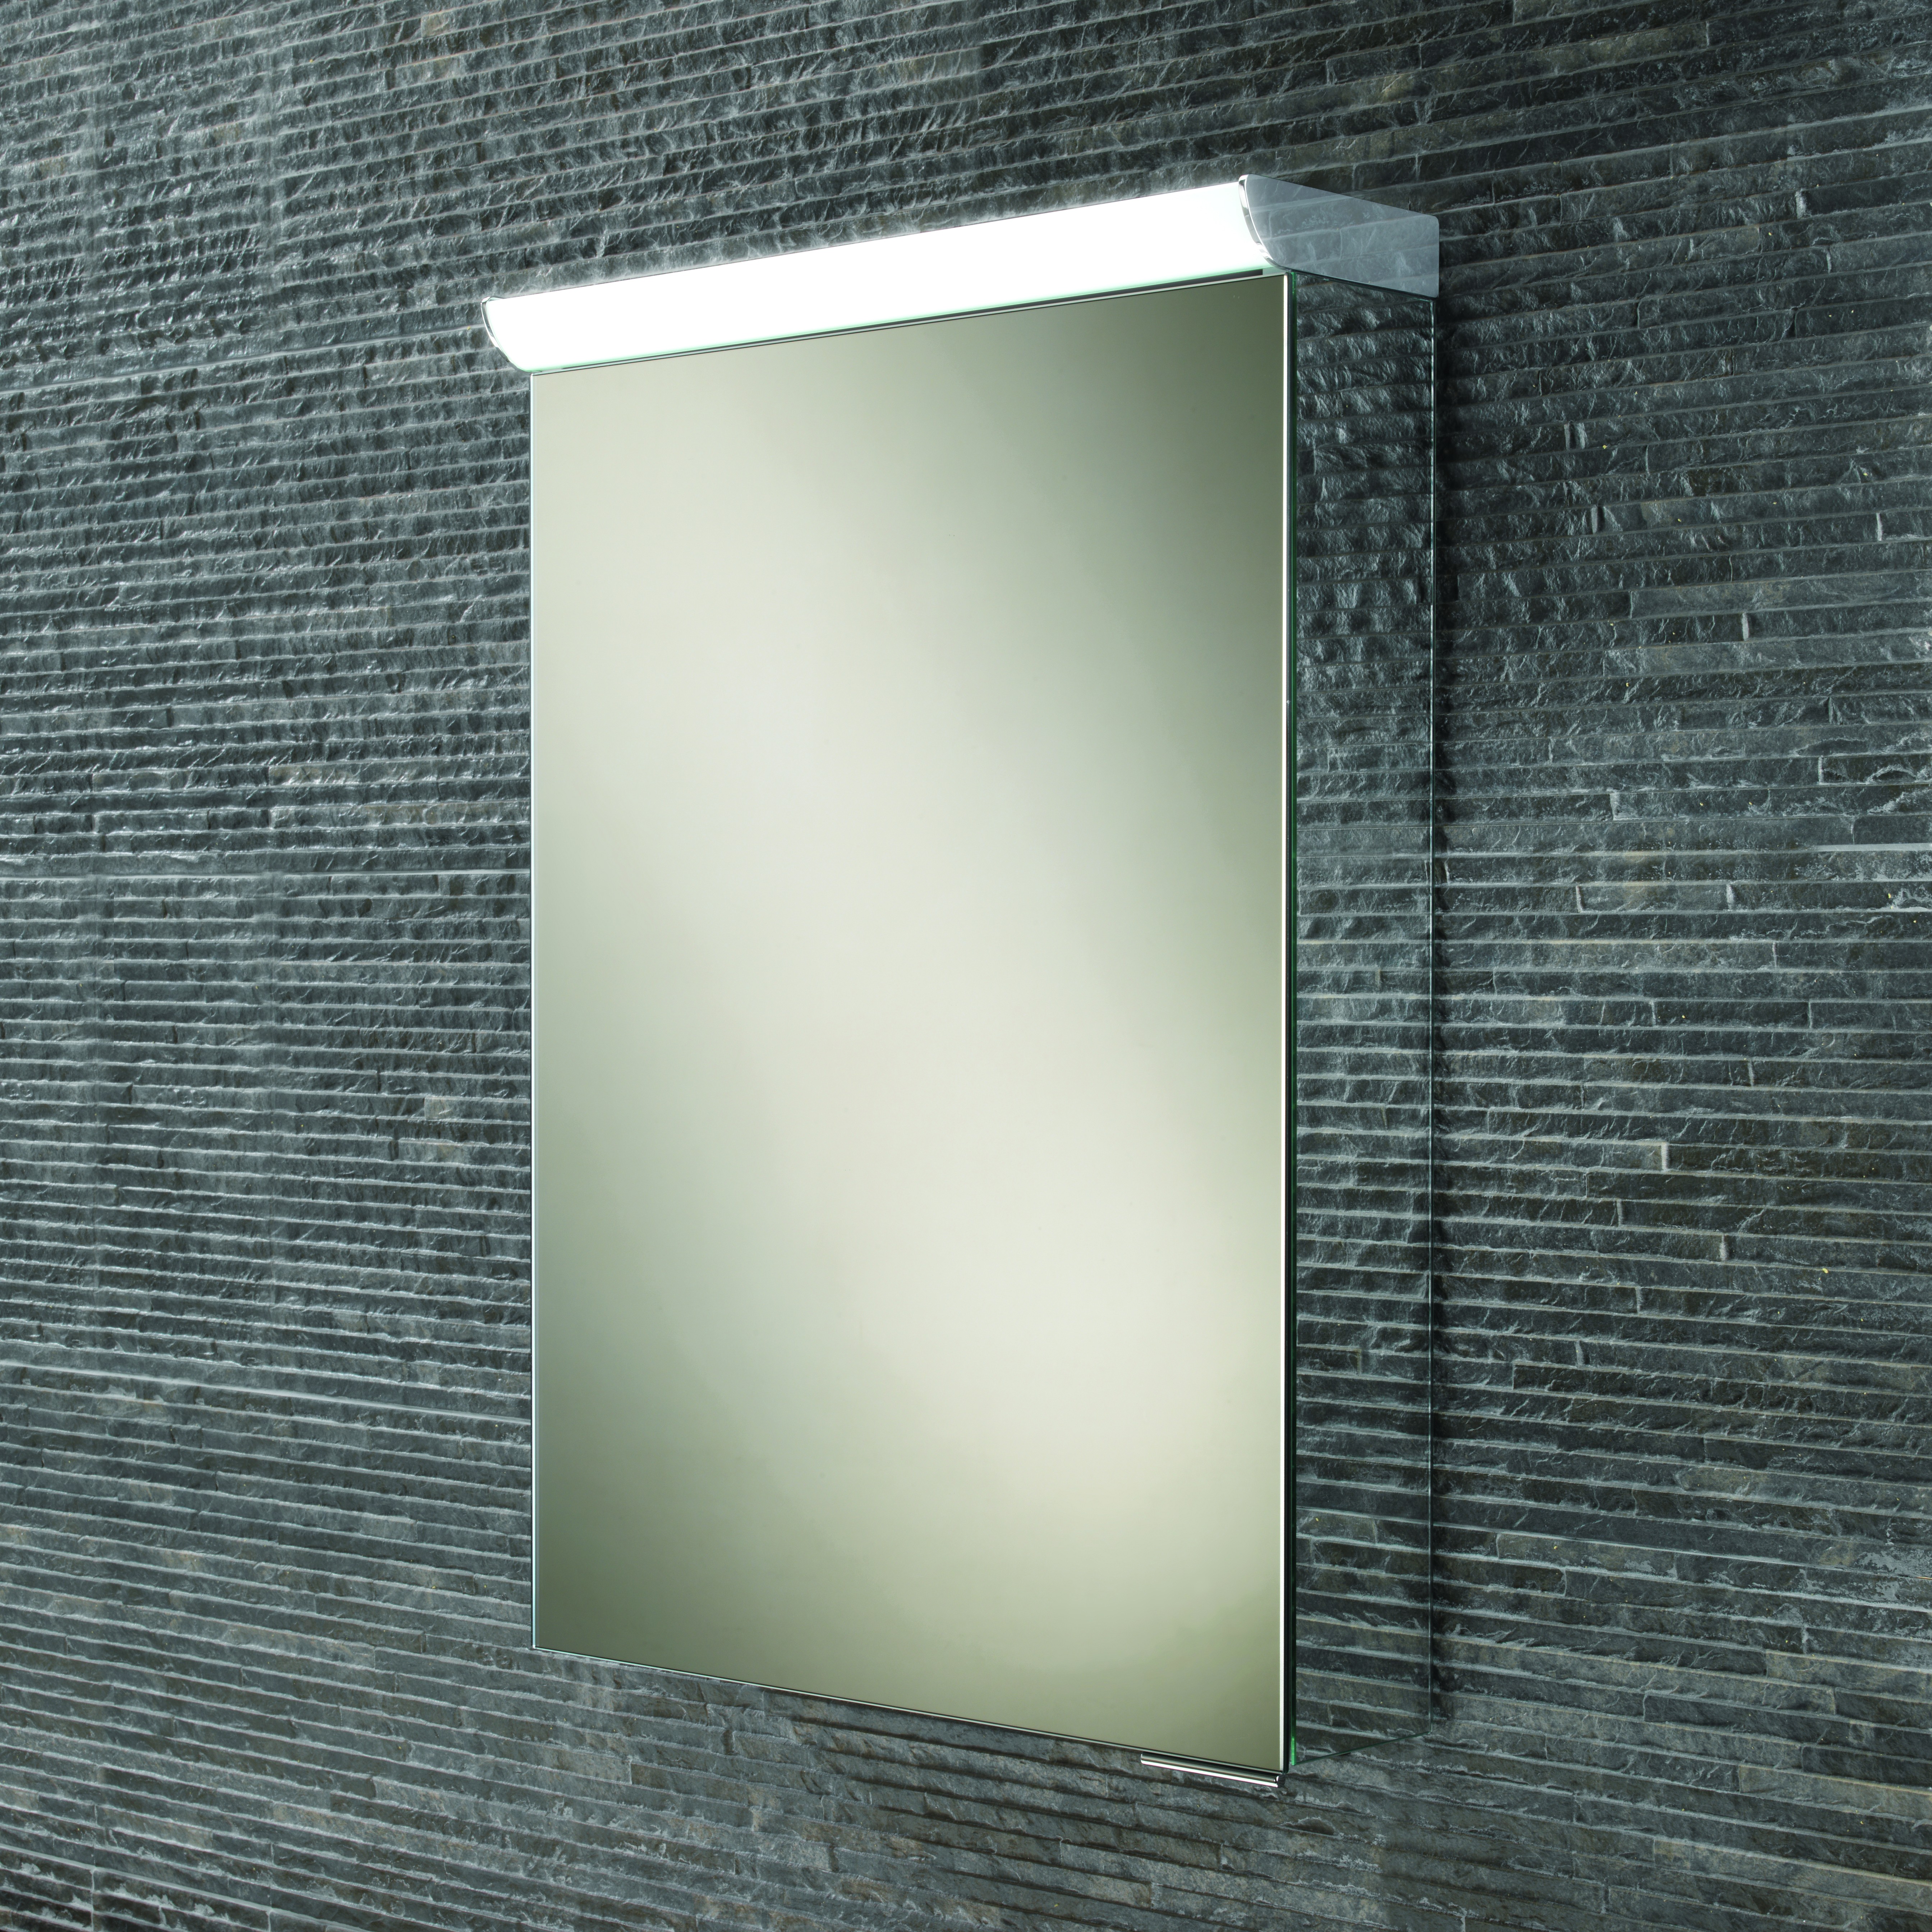 HIB 44600 Flux LED Mirrored Cabinet with Mirrored Sides 600 x 400mm